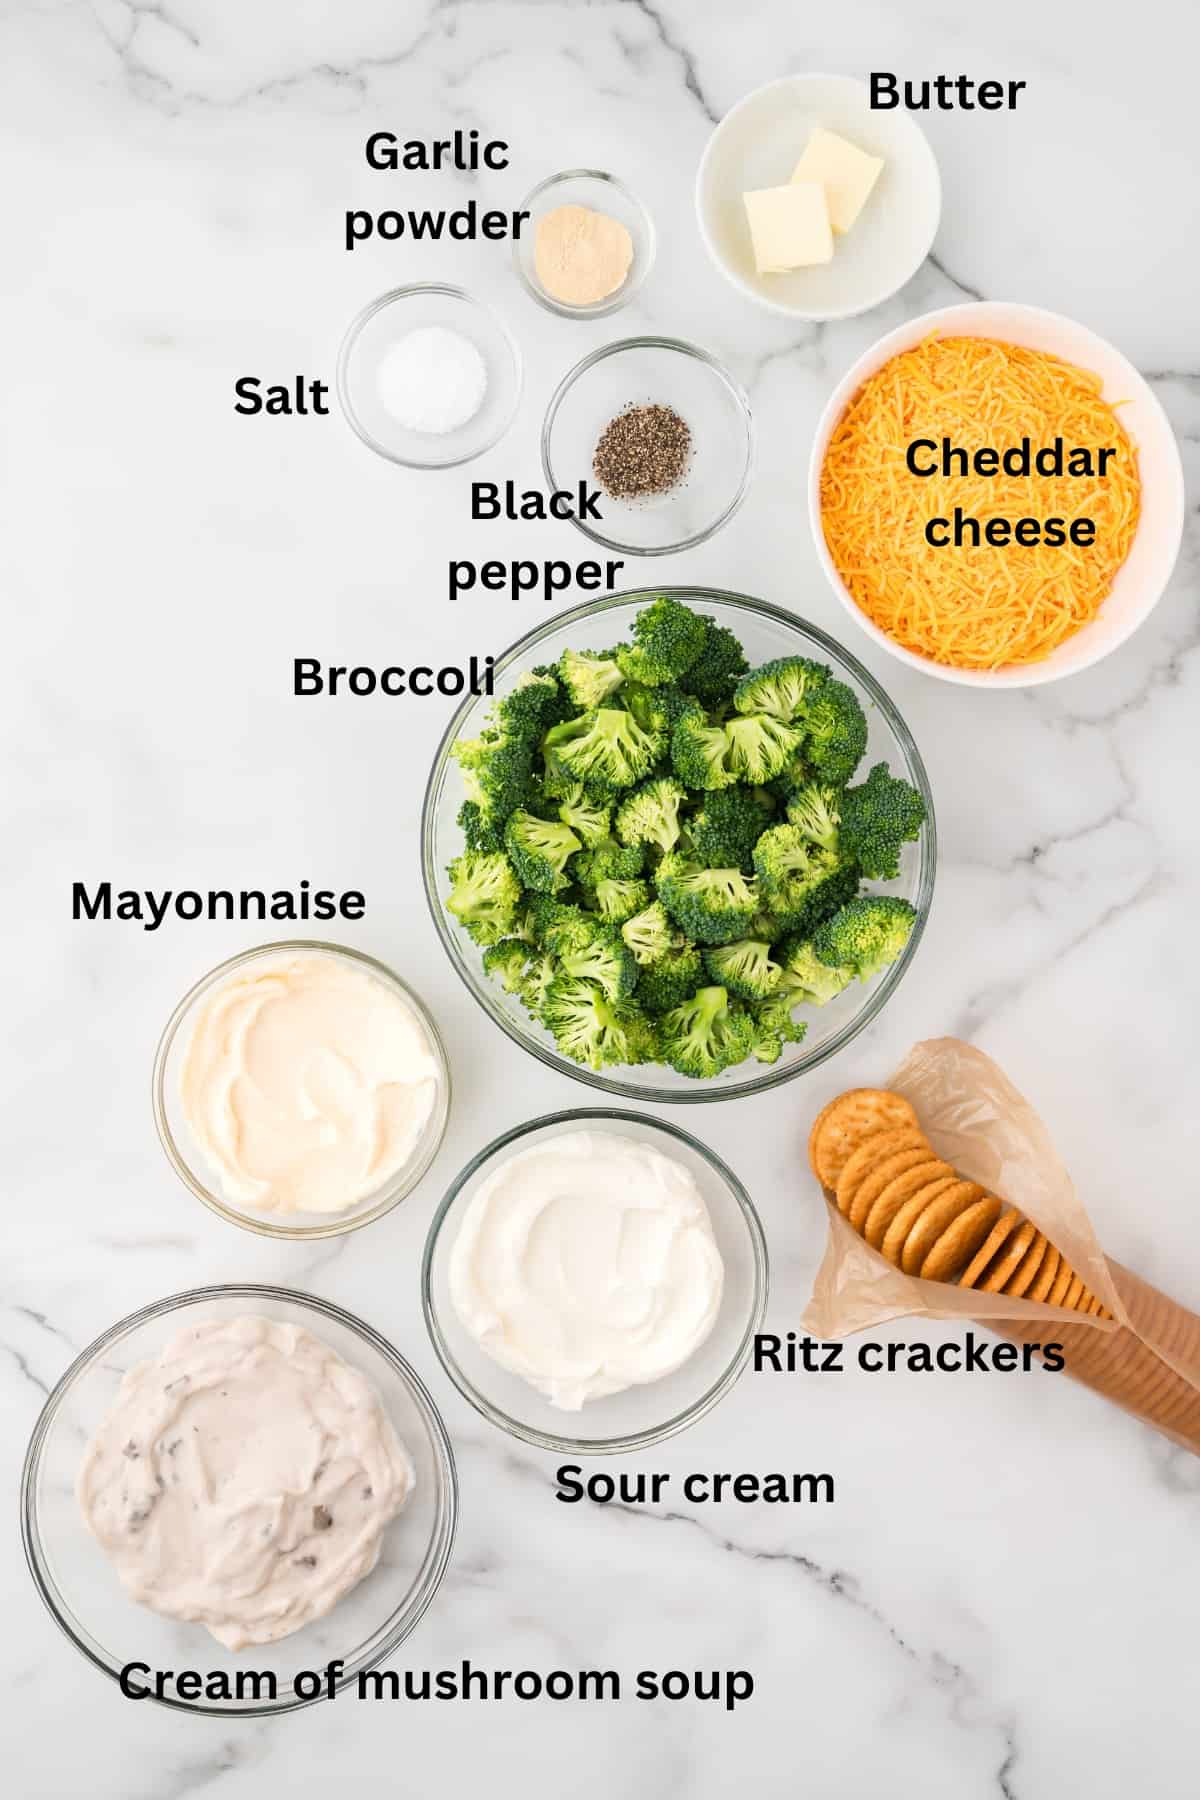 Ingredients for broccoli cheese casserole include broccoli florets, shredded cheese, and a bowl of sour cream. 